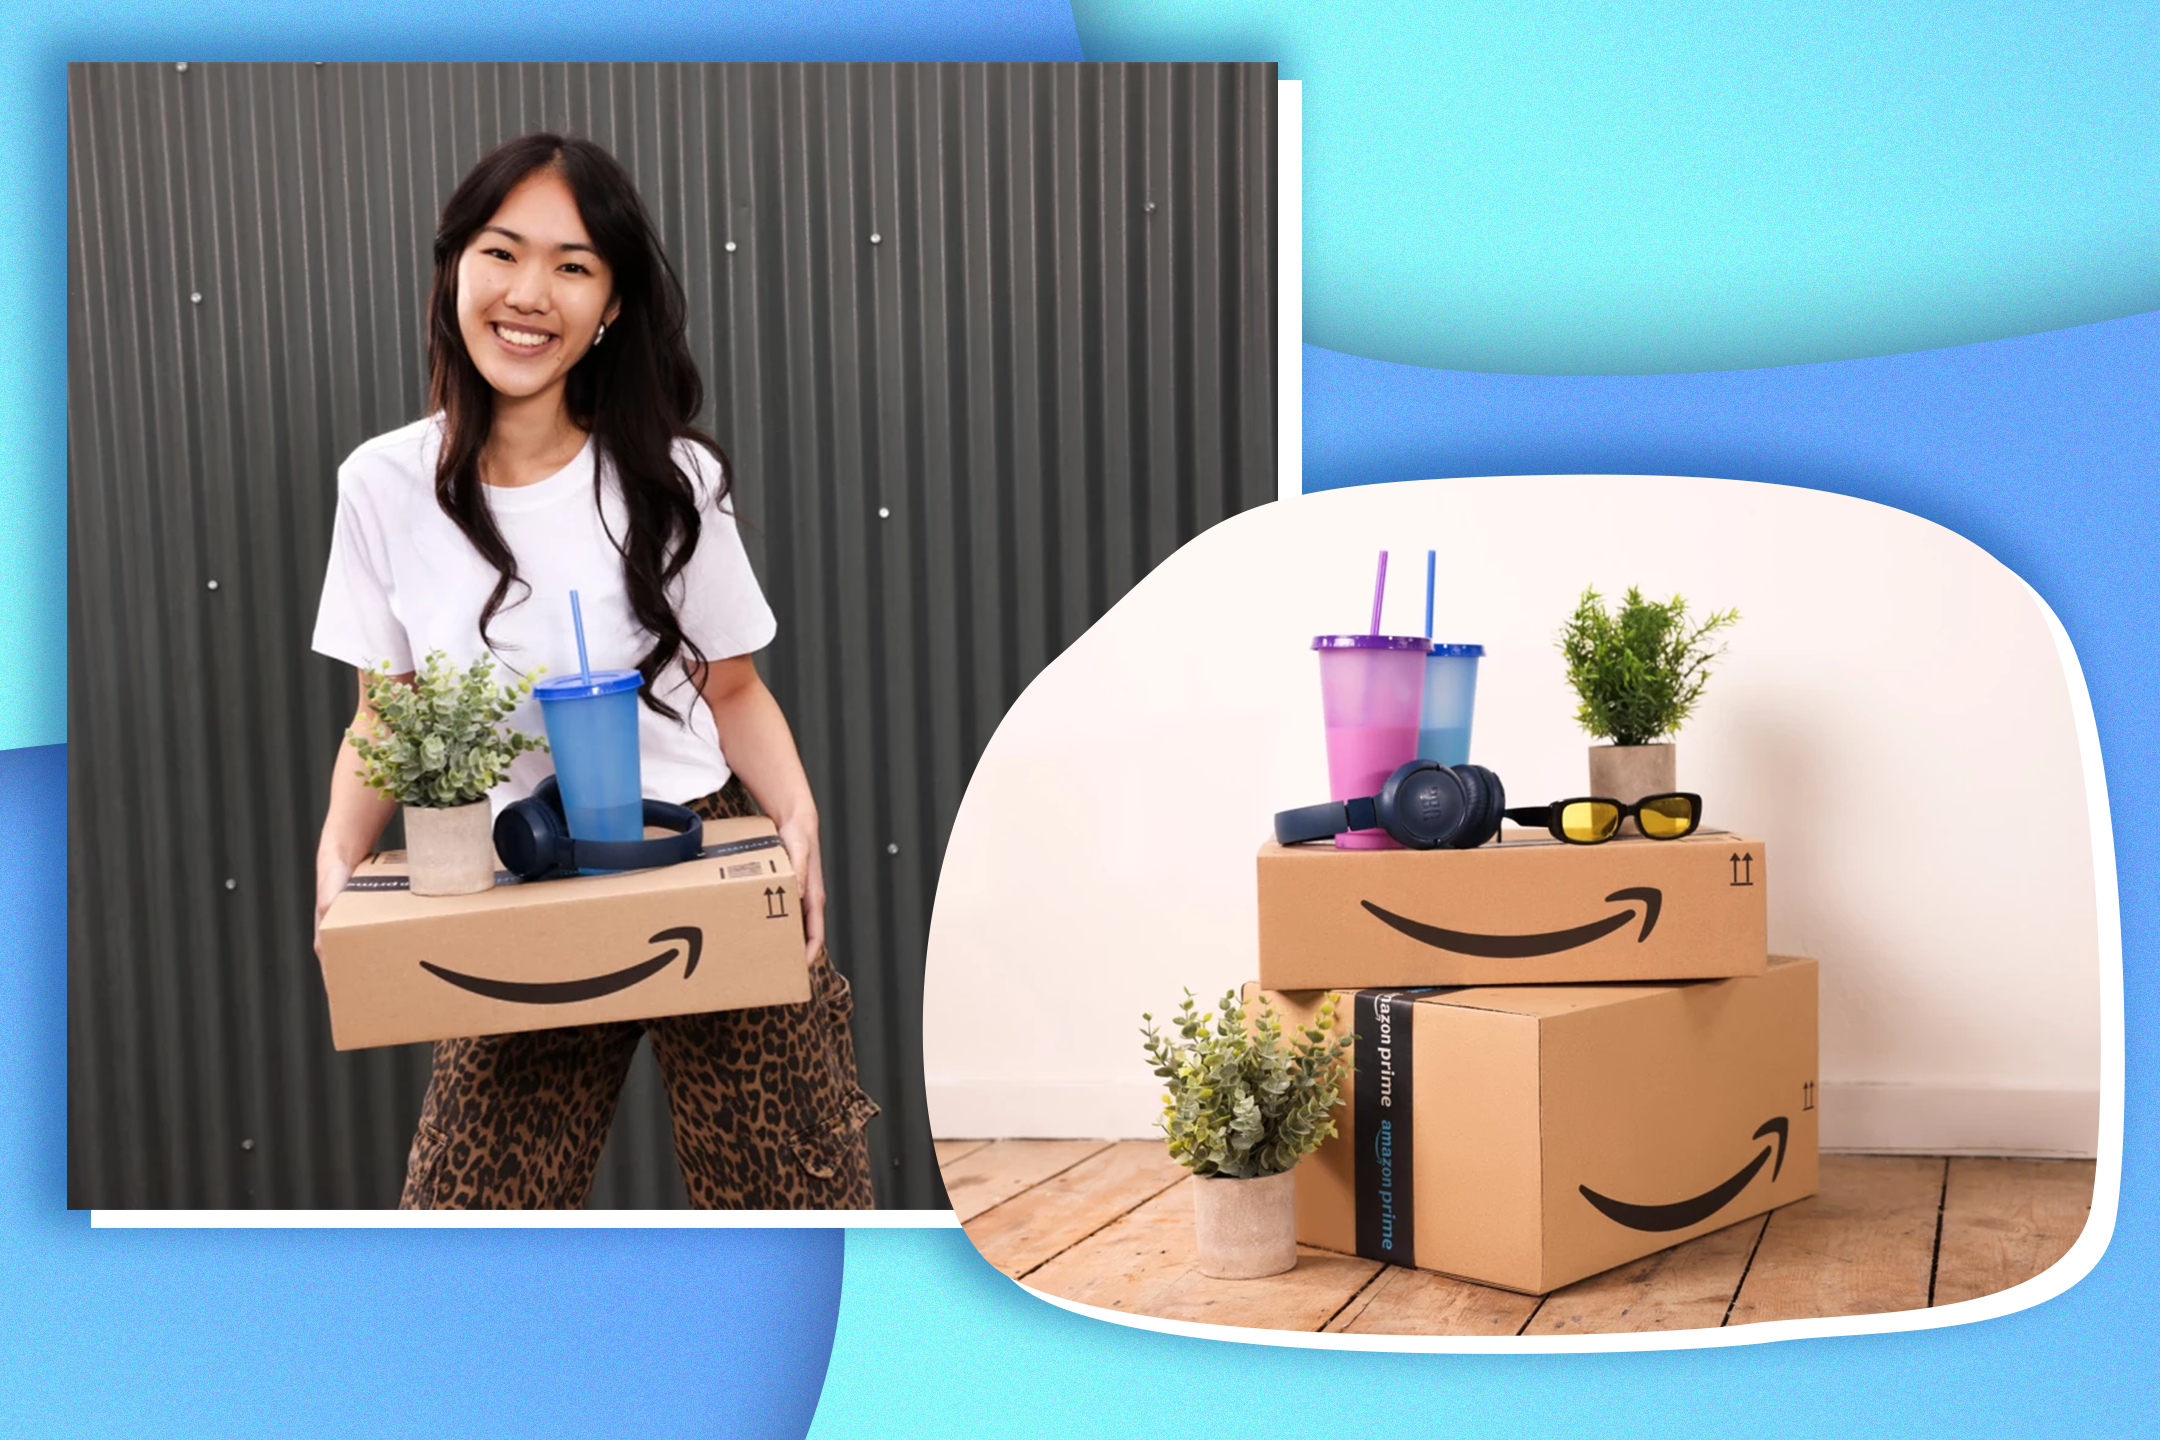 Amazon is extending its usual Prime Student discount to everyone in the UK aged between 18 and 22